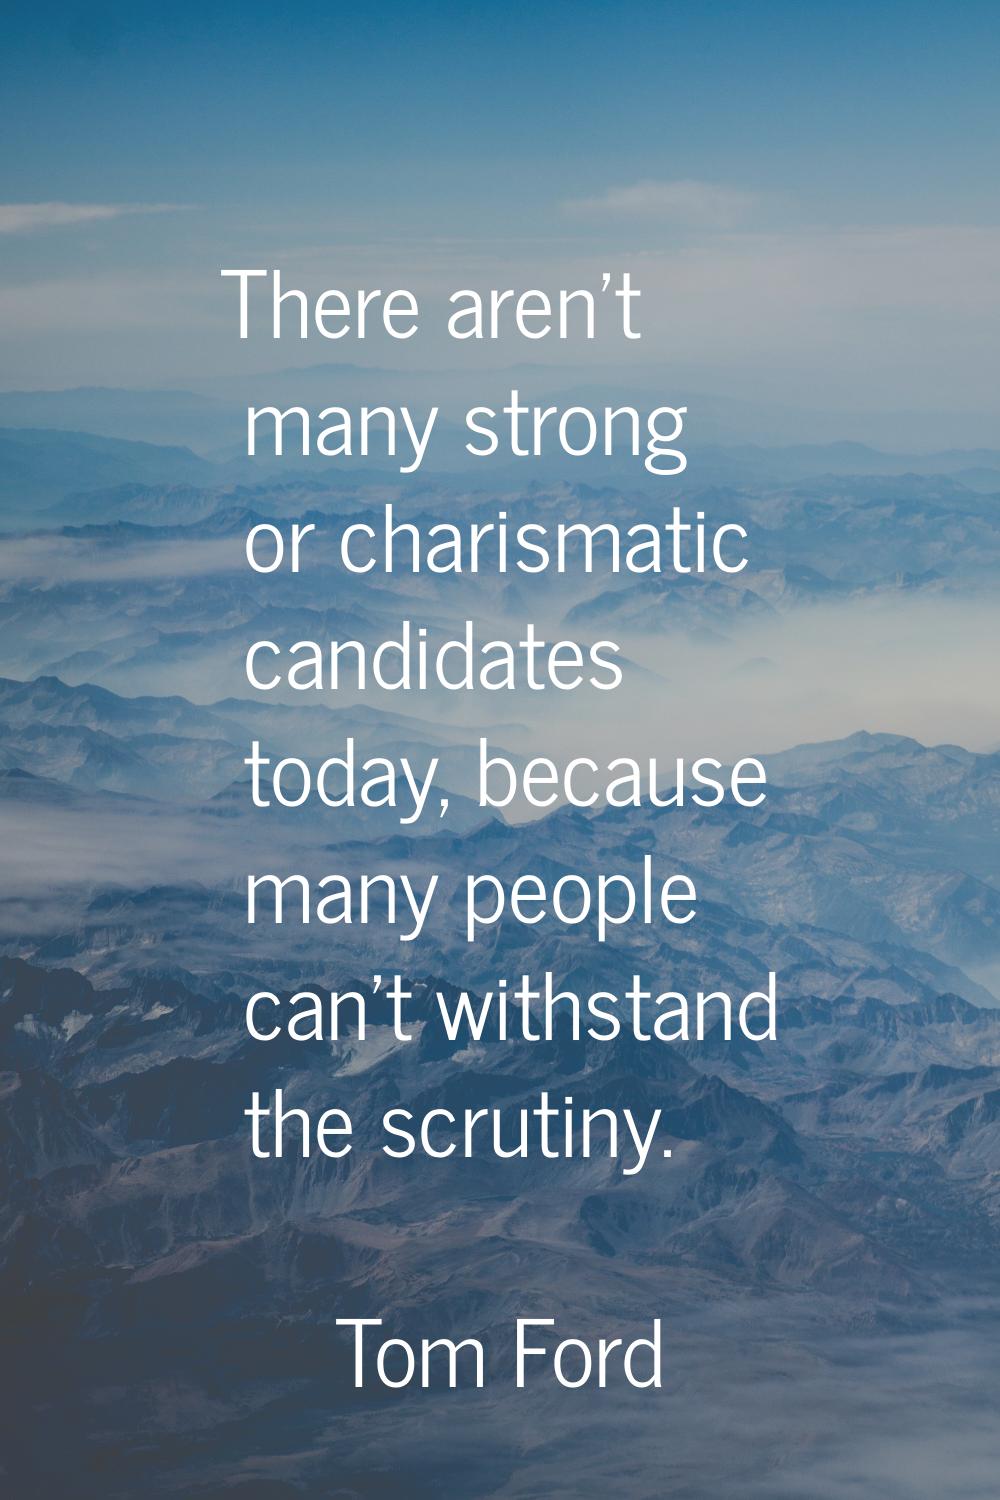 There aren't many strong or charismatic candidates today, because many people can't withstand the s